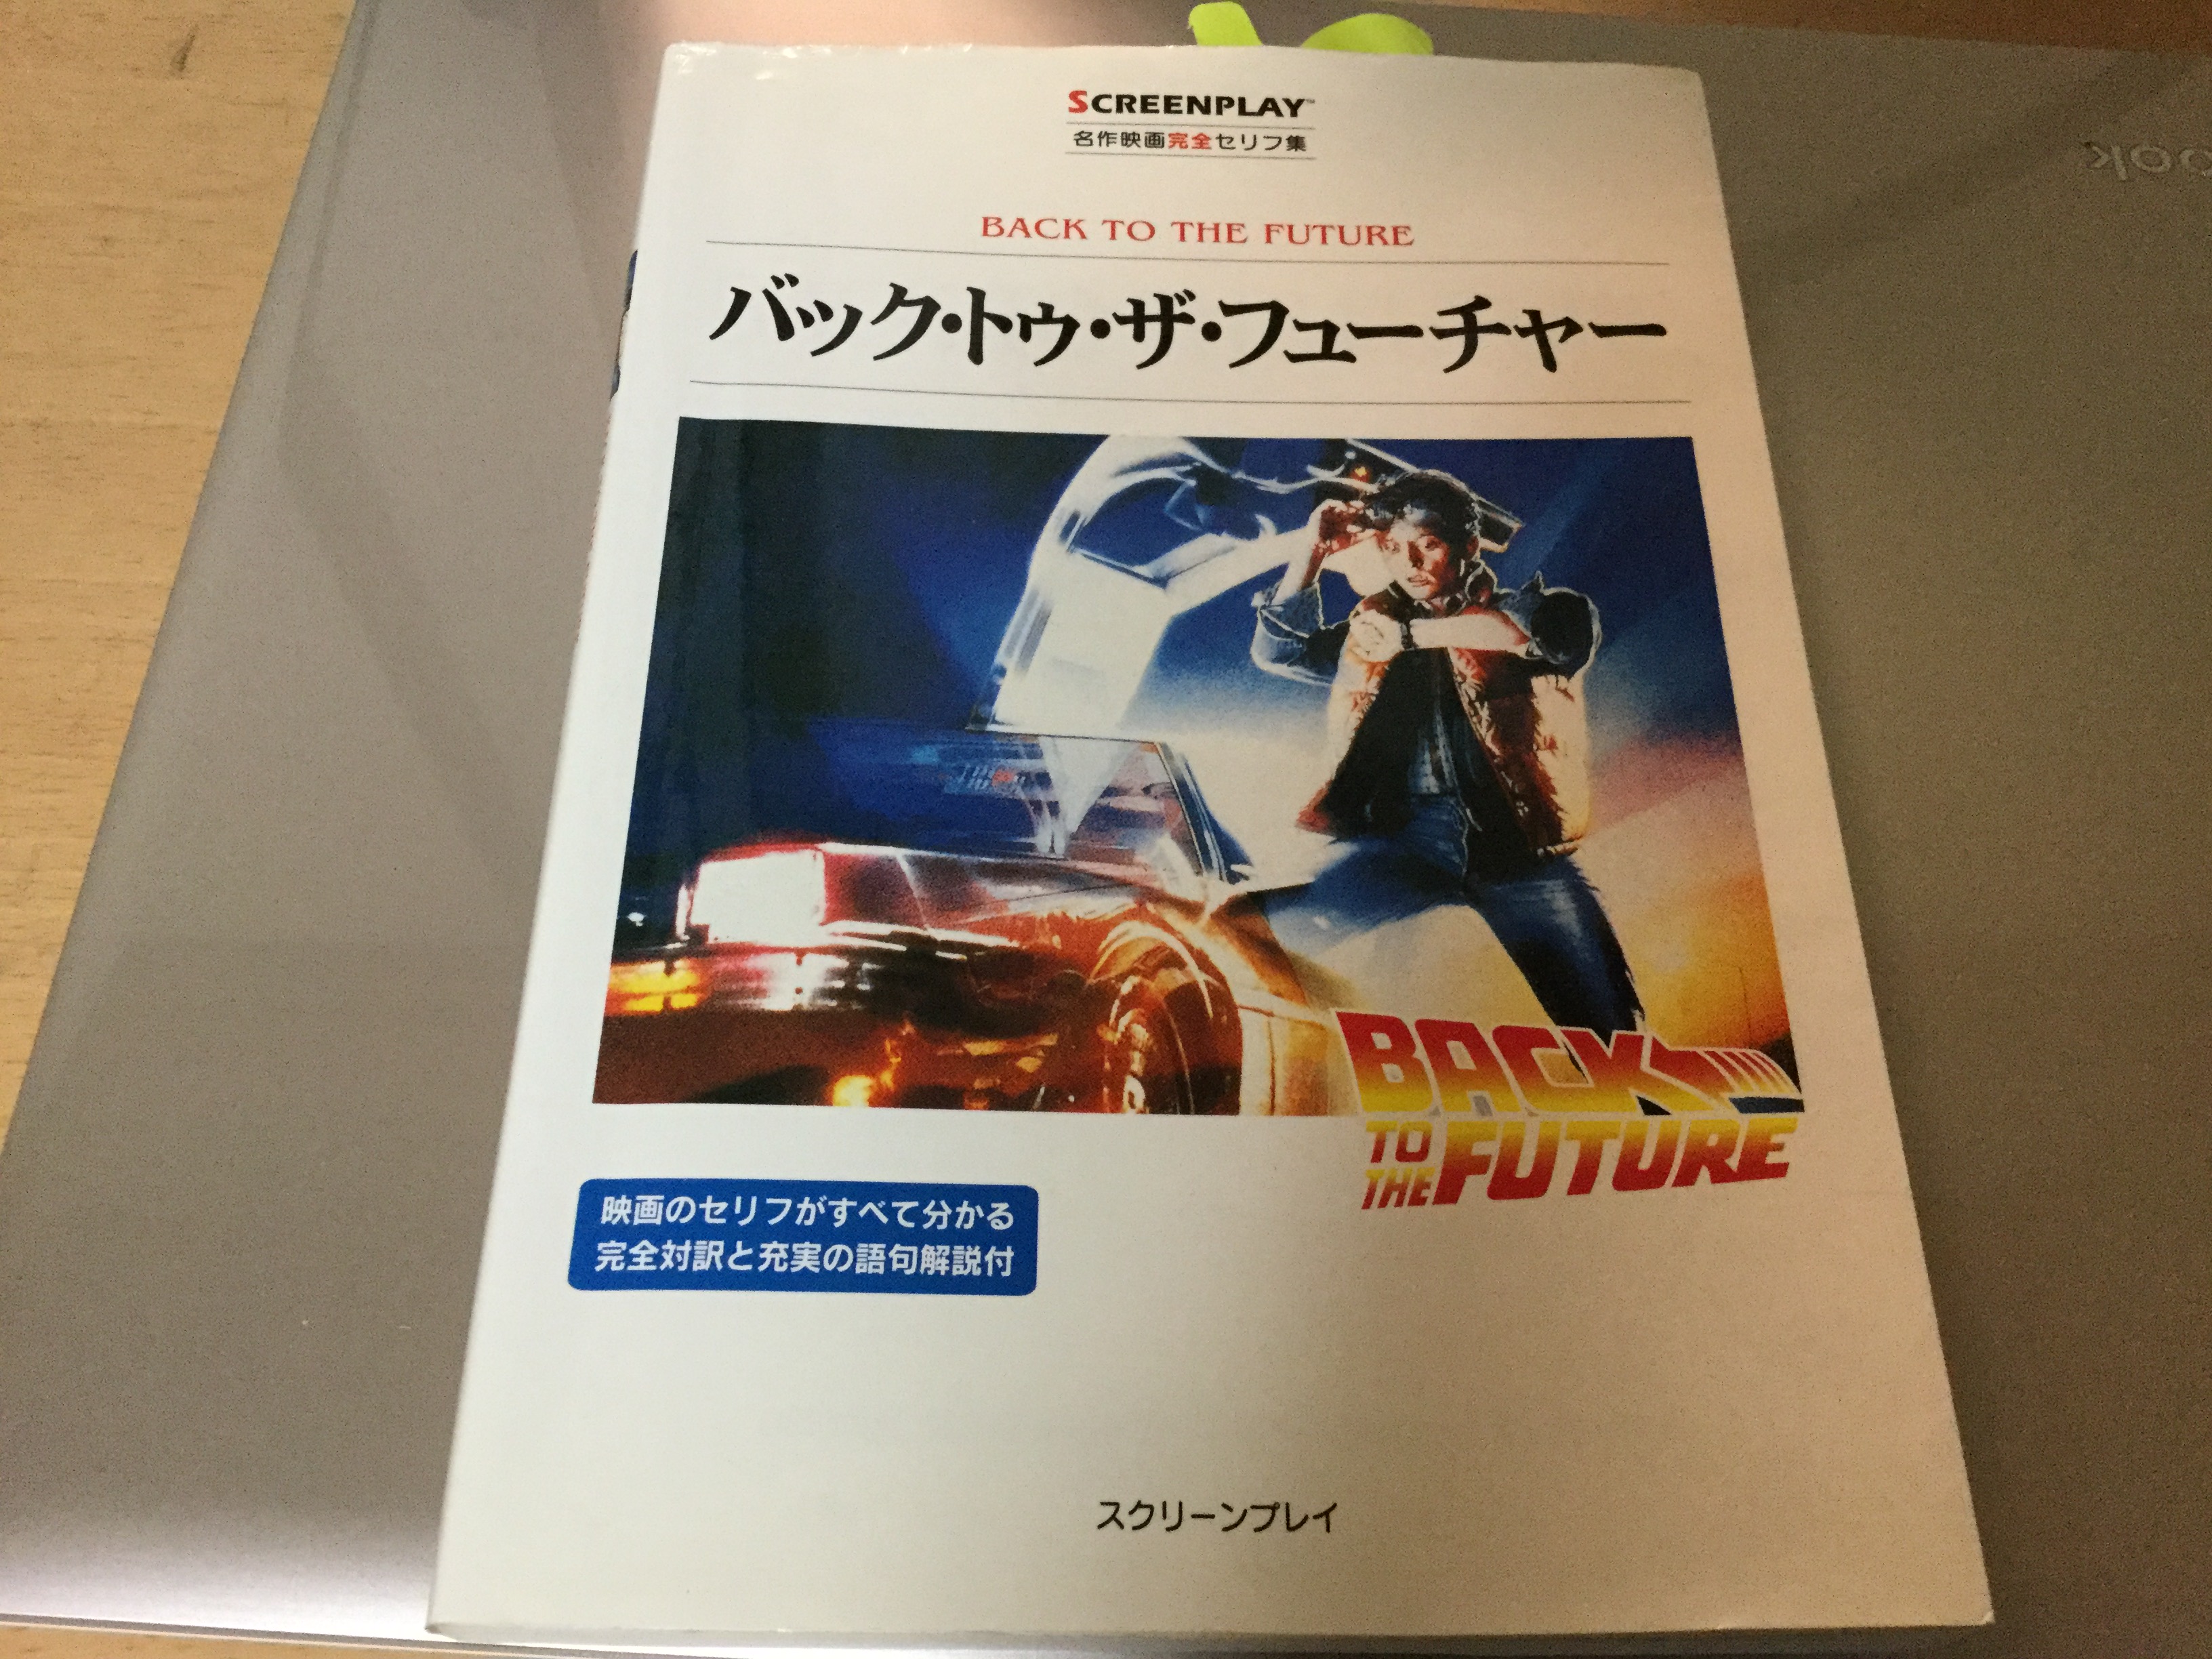 Back To The Future Textbook Old Version Eigostar English エイゴスター横浜青葉区英会話